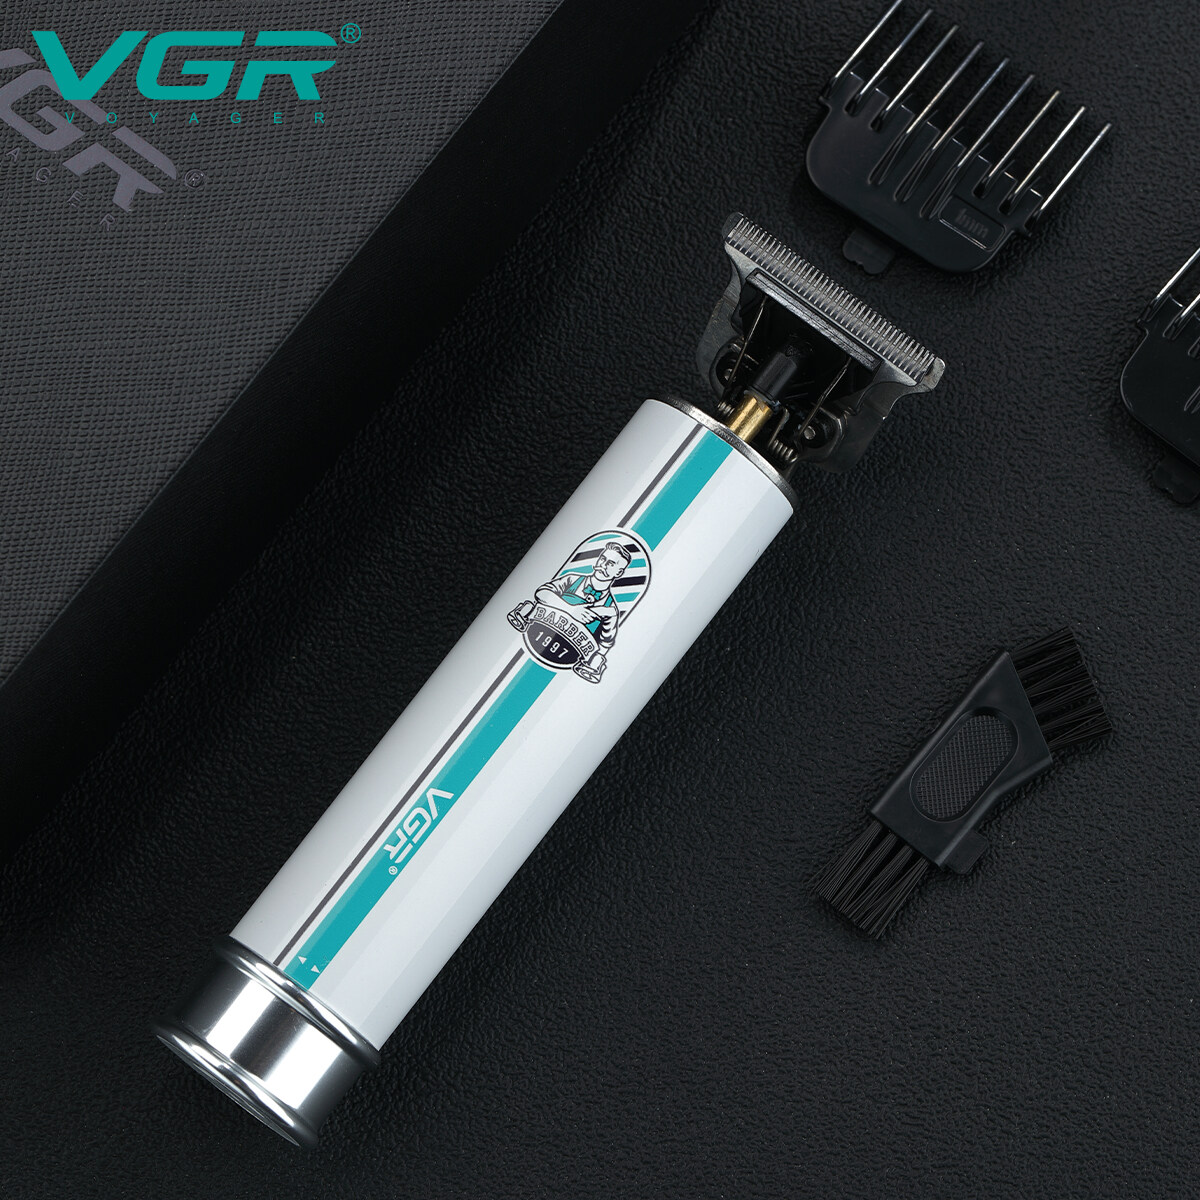 domestic use hair trimmer manufacturer, domestic use hair trimmer supplier, trimmer factories, barber hair clipper factories, cordless rechargeable hair clipper factory